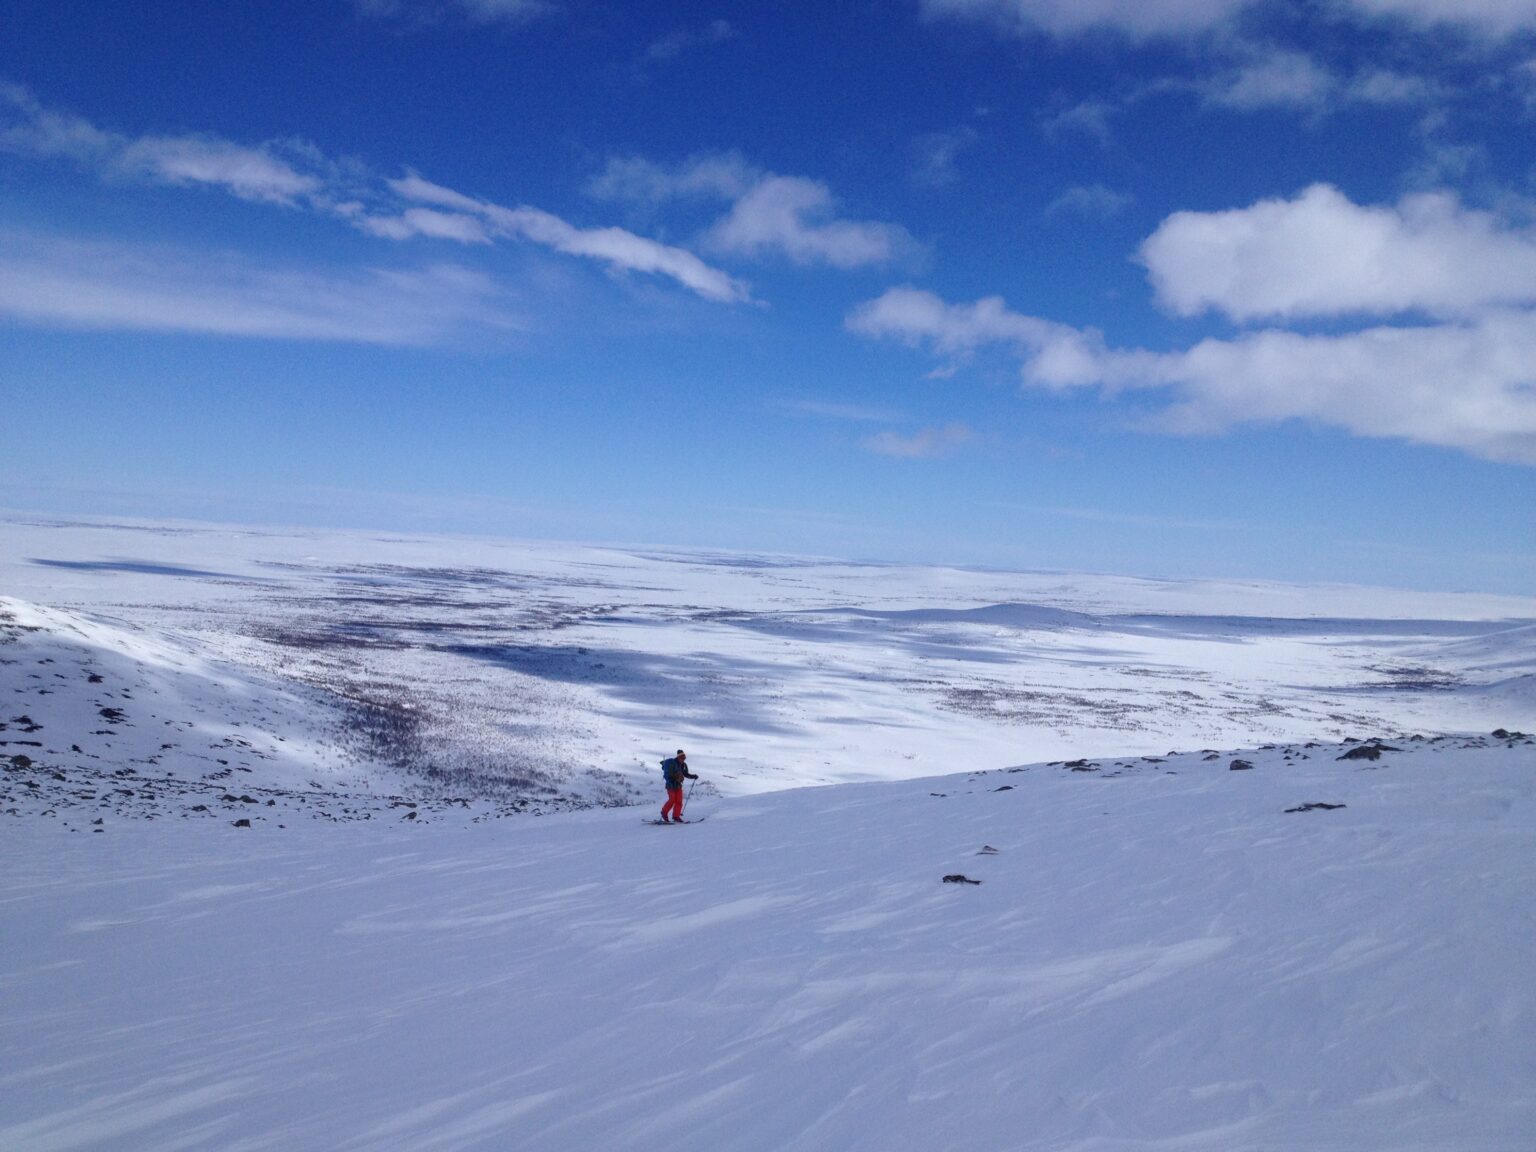 Ski touring up with the flat terrain of Finnish Lapland in the distance